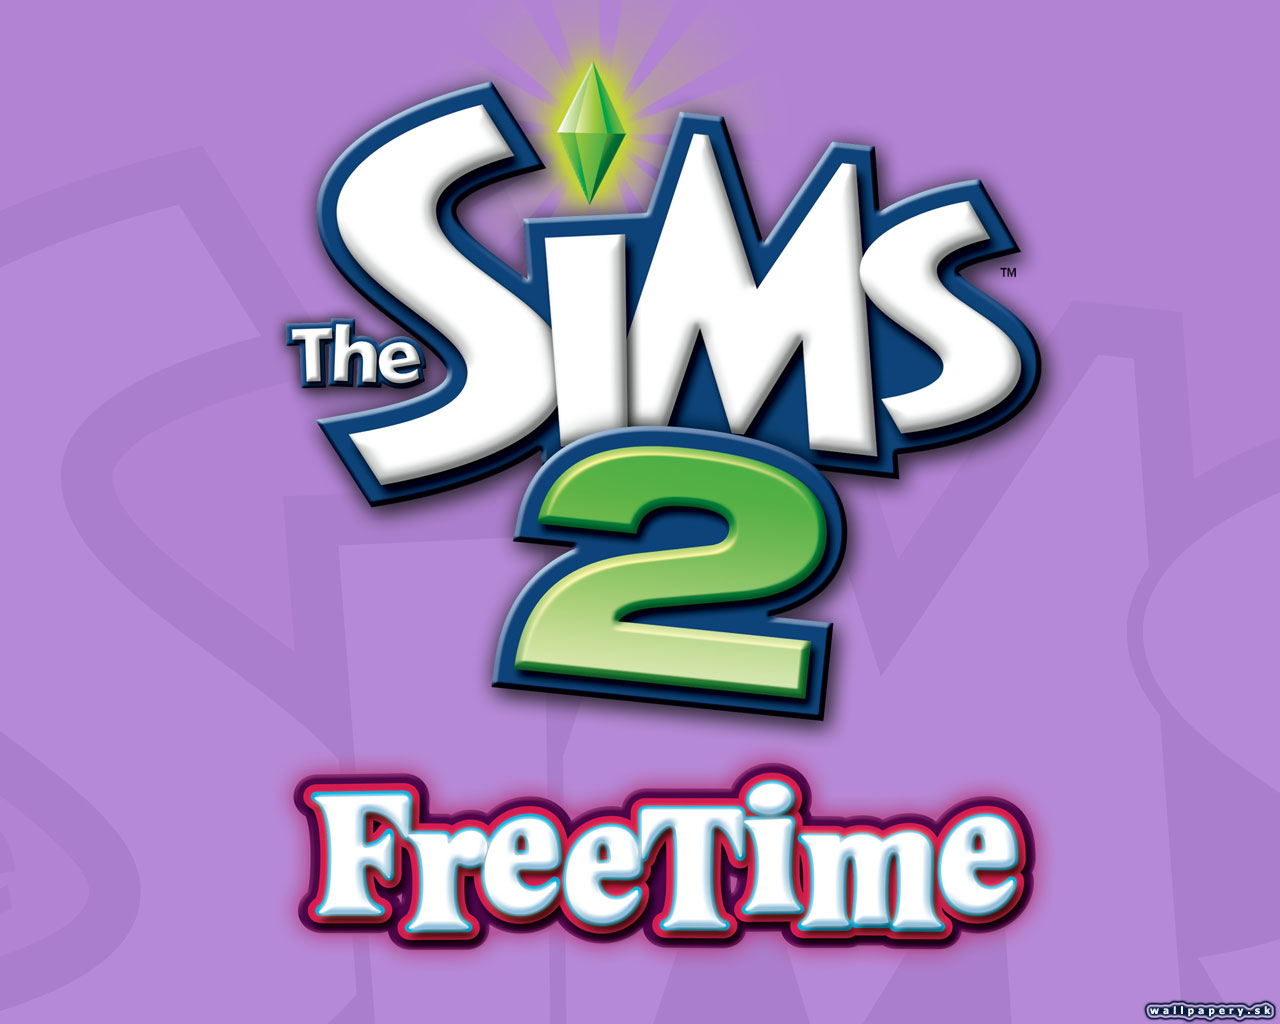 The Sims 2: Free Time - wallpaper 3